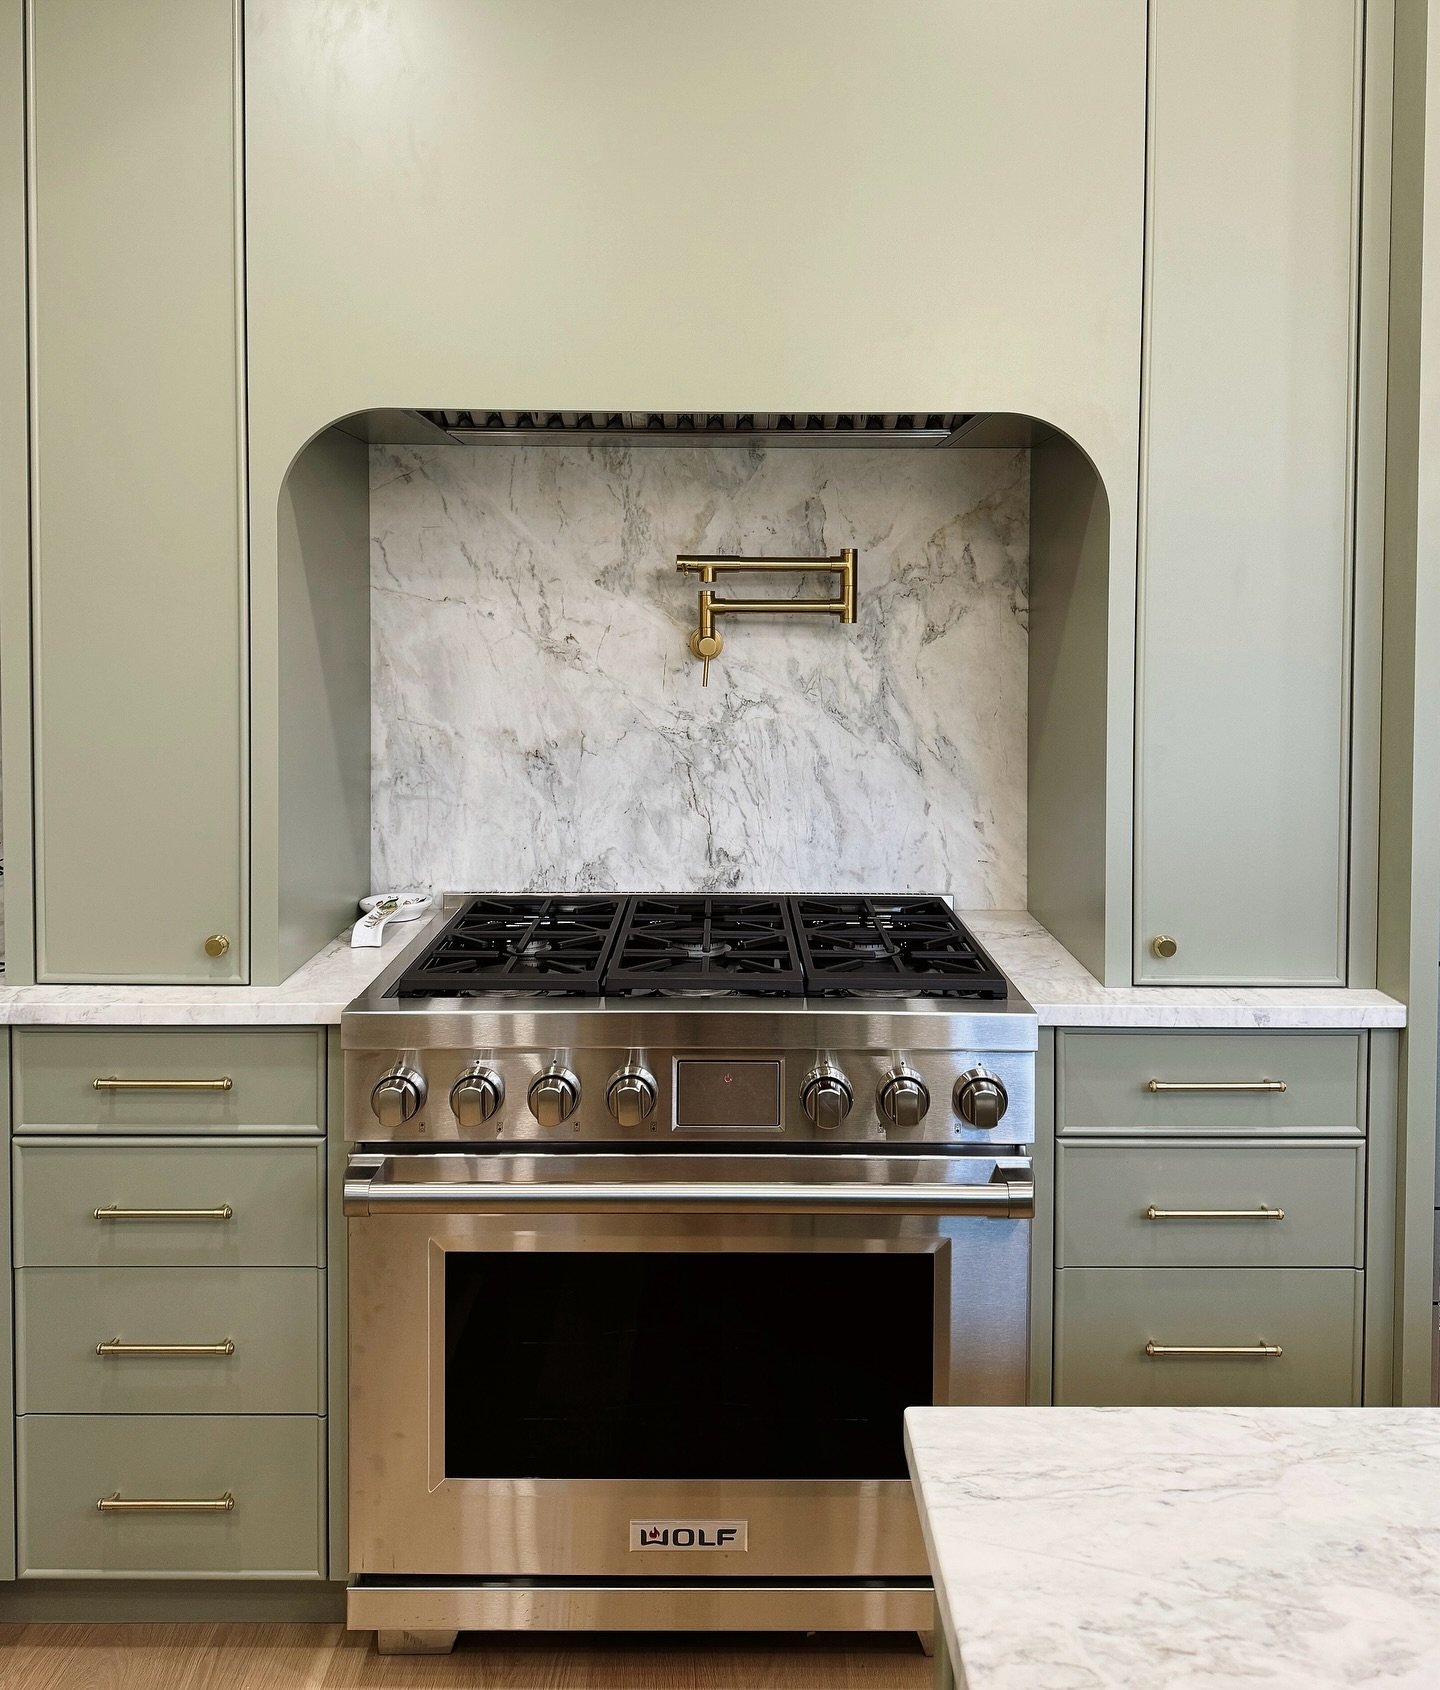 If kitchens could speak, this one from our Glencoe Project would be saying a lot.
.
.
.
.
.

#interiordesigninspo #interiordesign #interiors #interiordesigner #interiordesigninspiration #interiordecorating #decor #chicagointeriordesigner #chicagointe